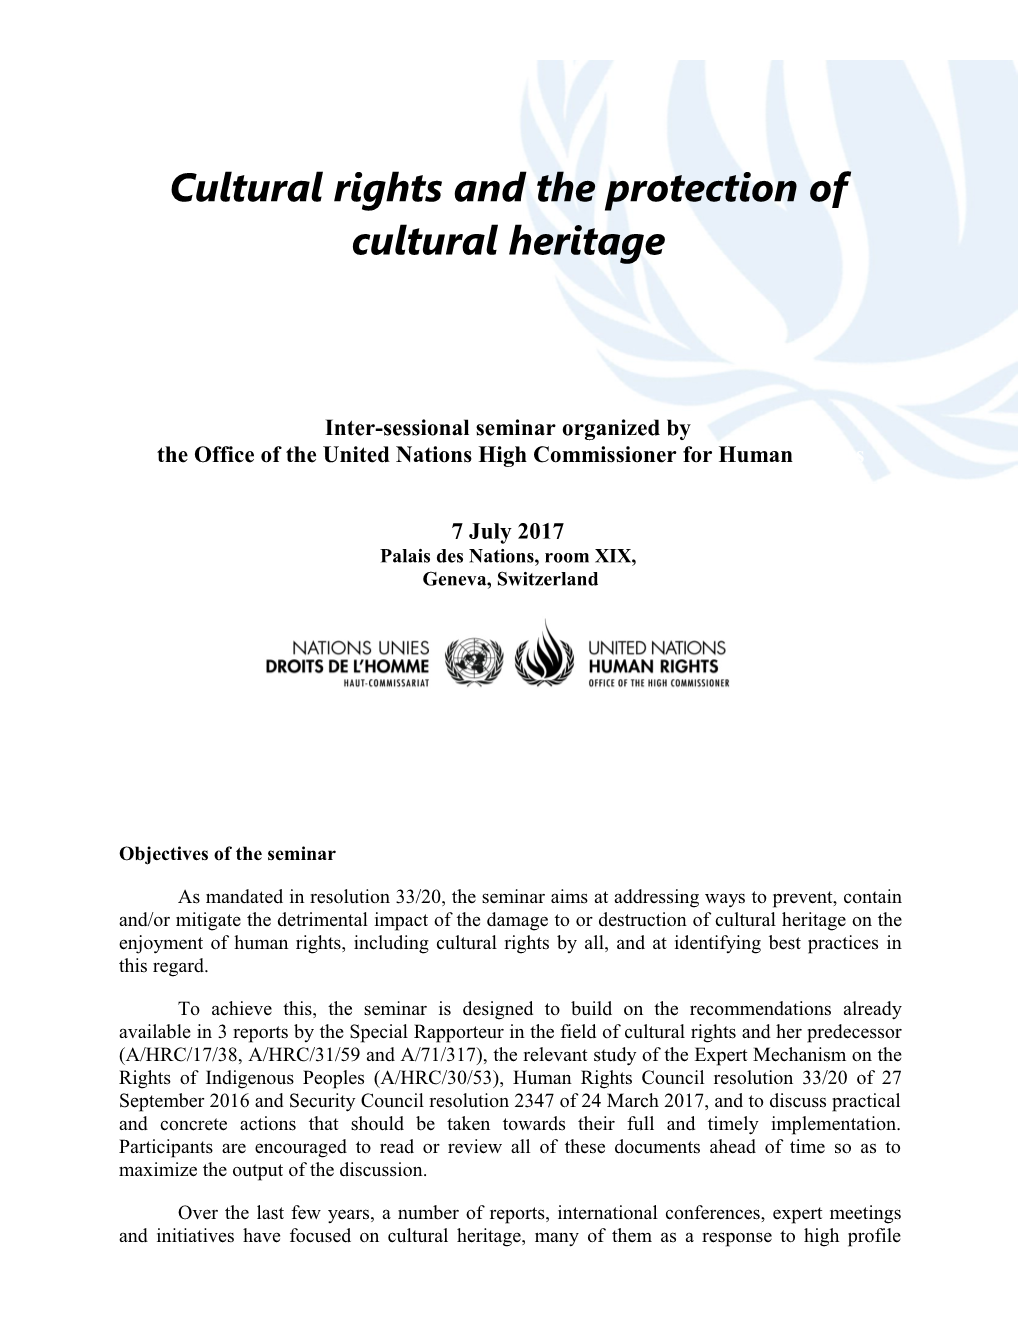 Cultural Rights and the Protection of Cultural Heritage